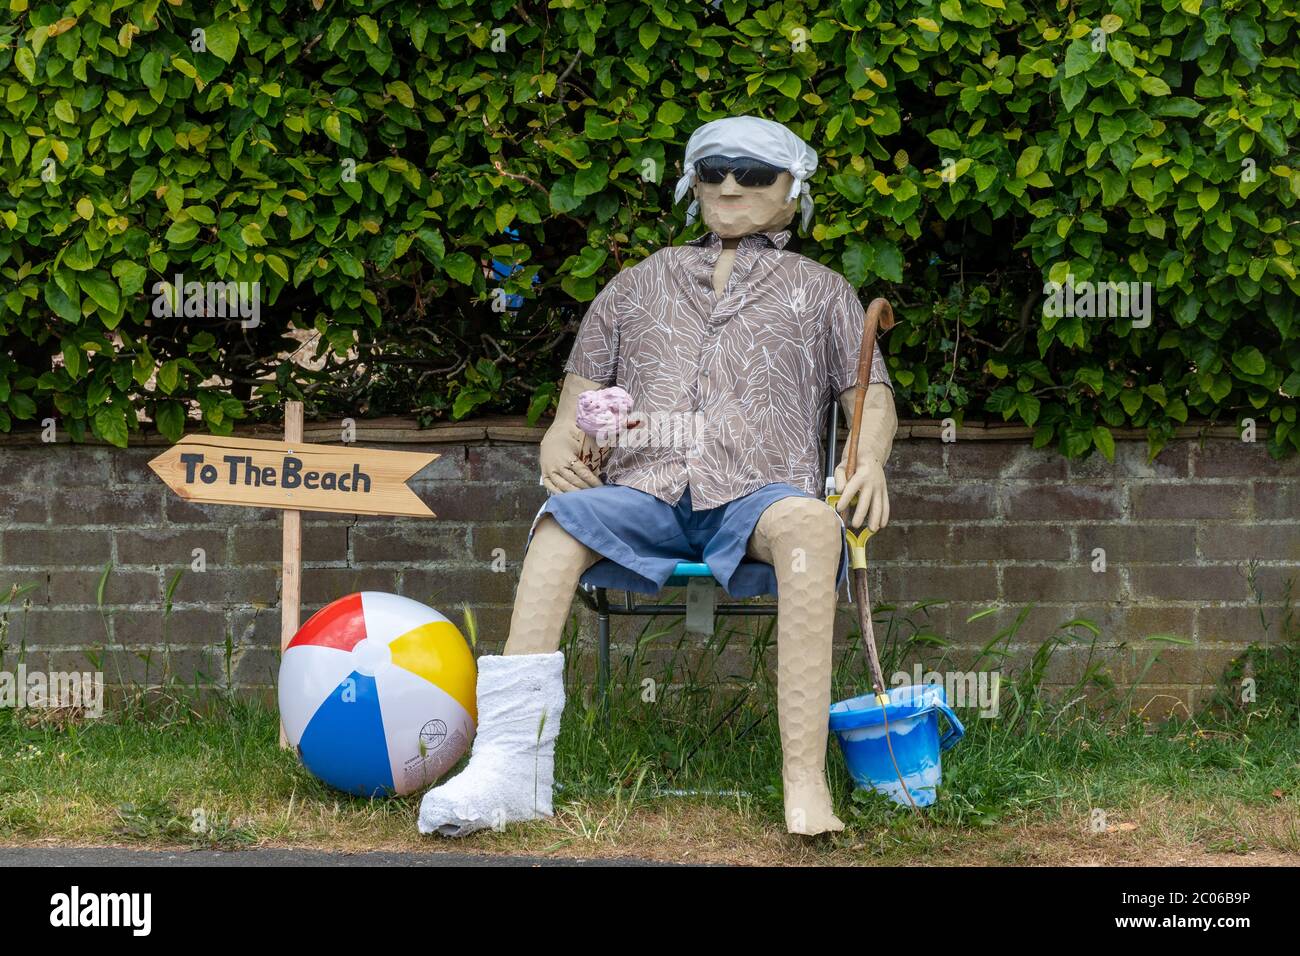 Scarecrow trail or festival, part of Old Basing carnival celebrations, Hampshire, UK. Scarecrow dressed for the beach. Stock Photo